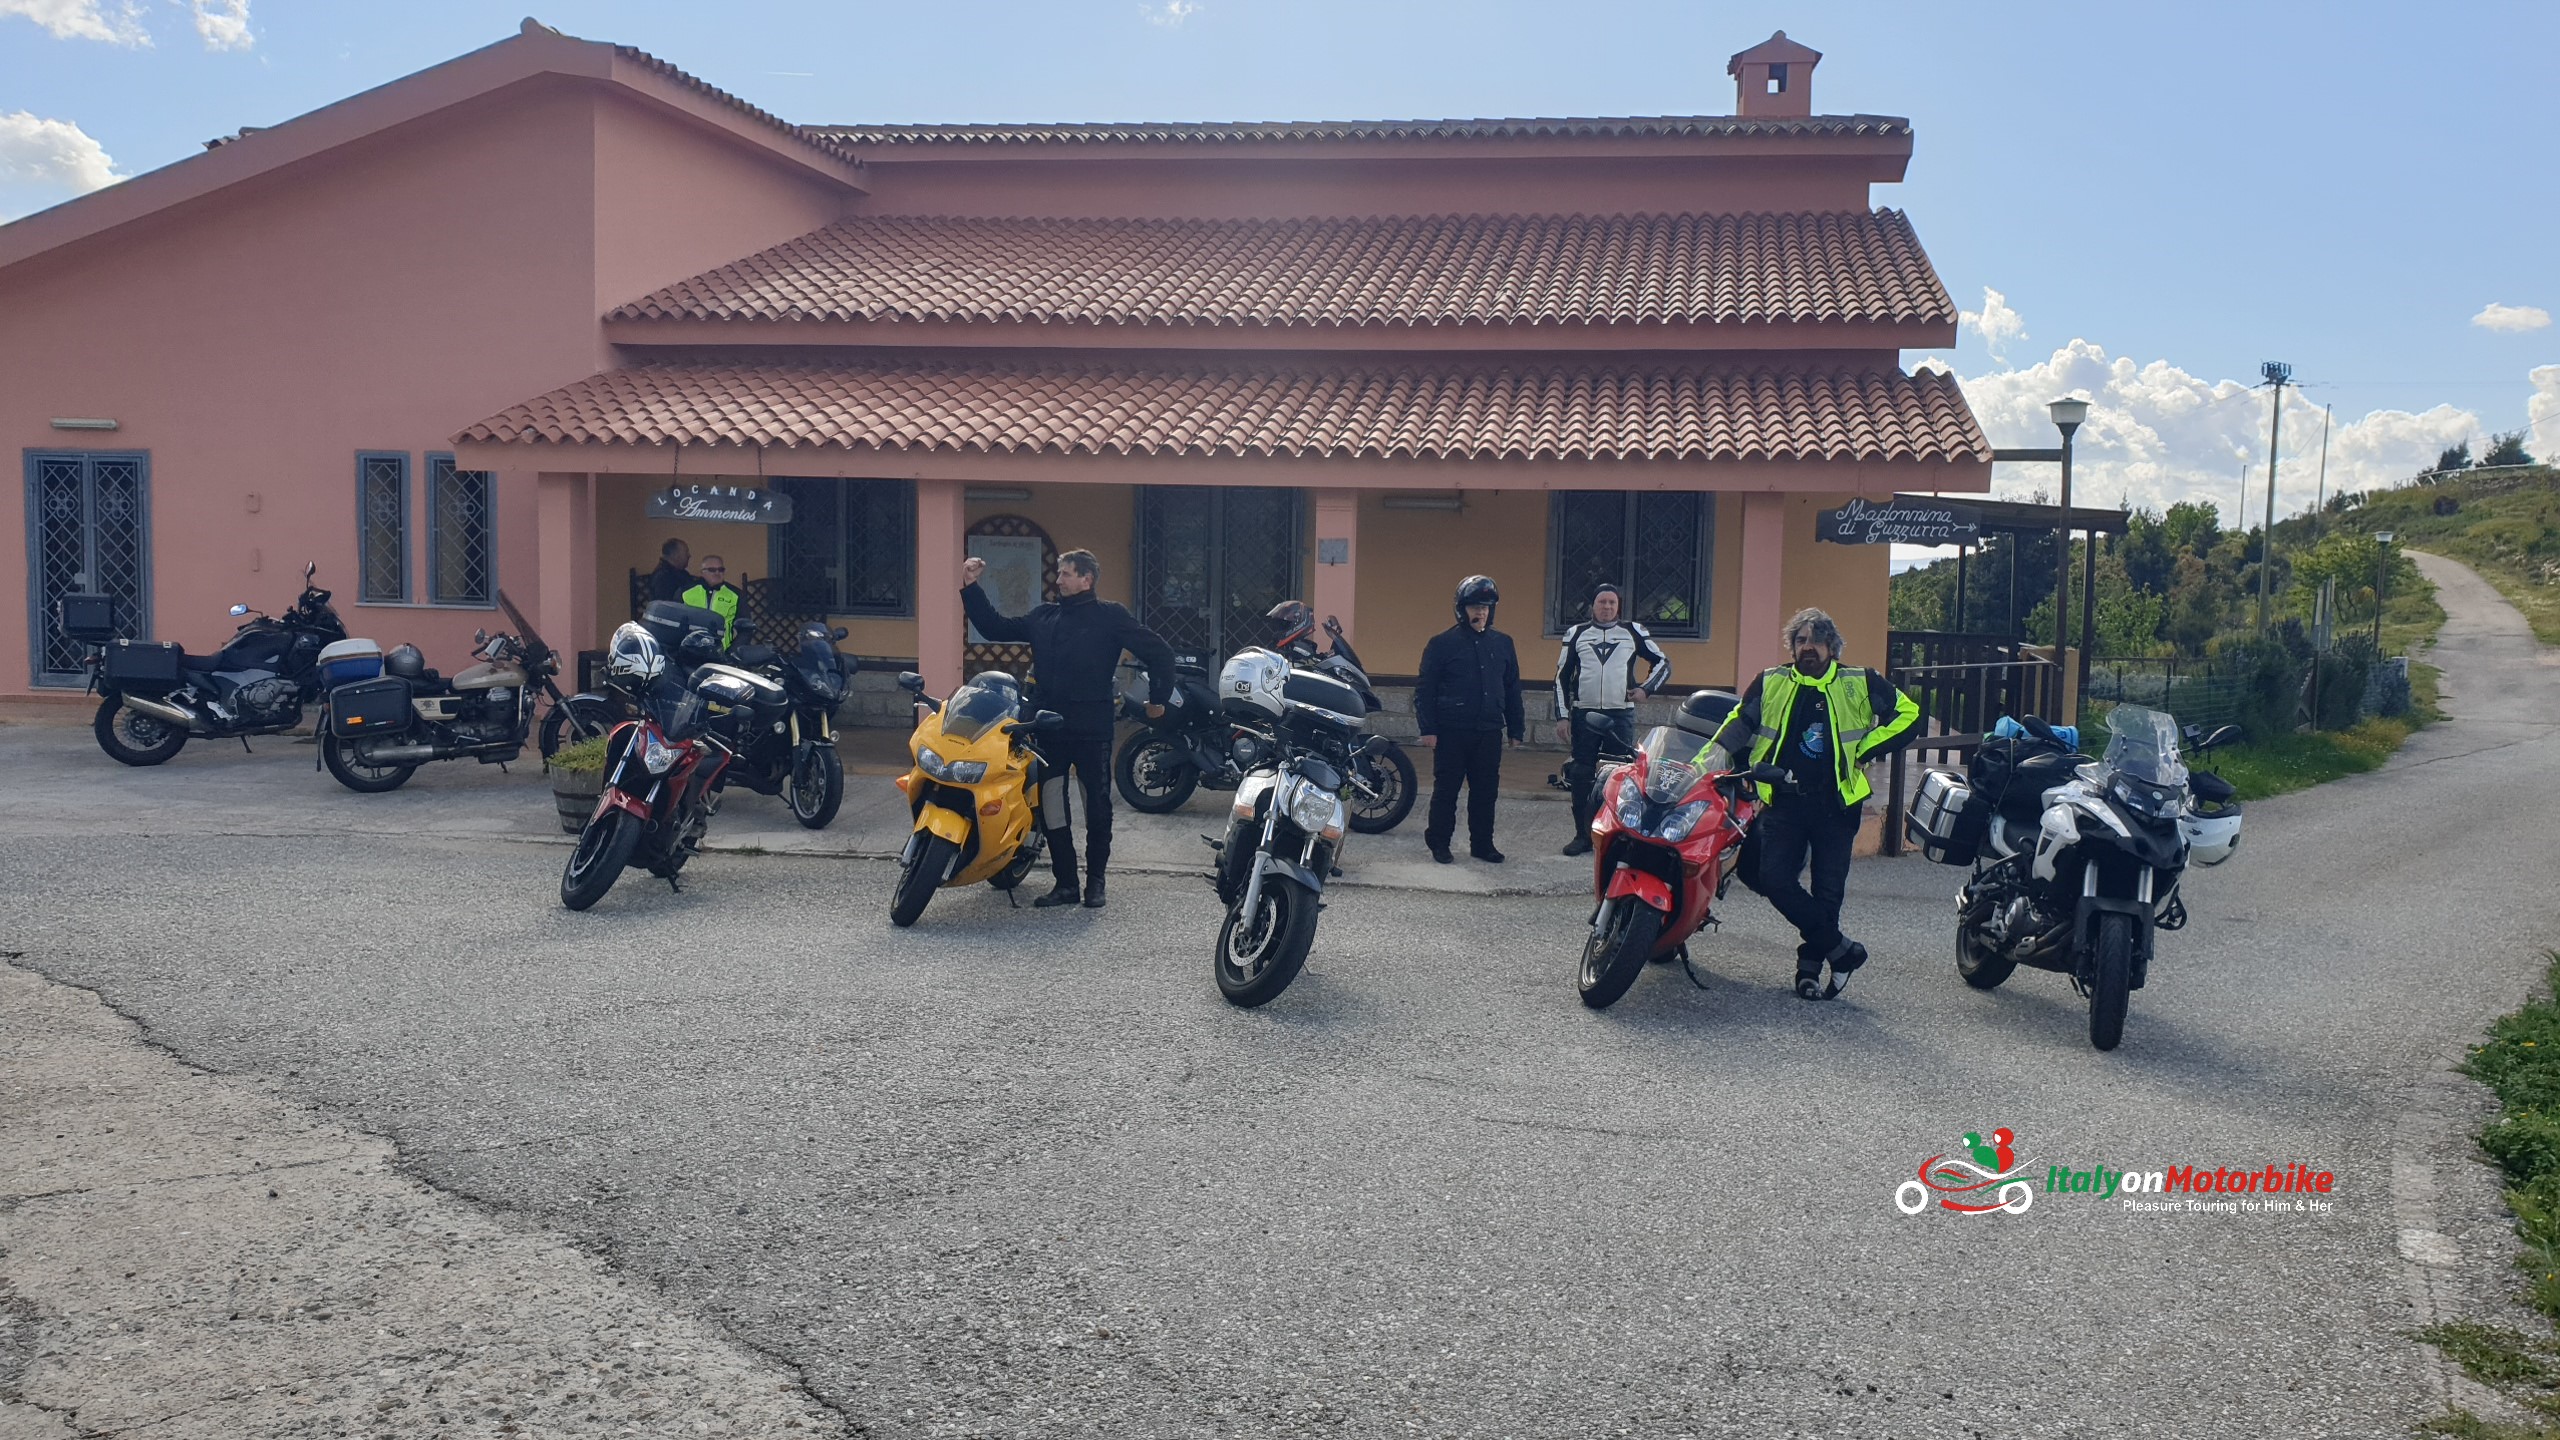 A break on a motorcycle guided tour with a local 